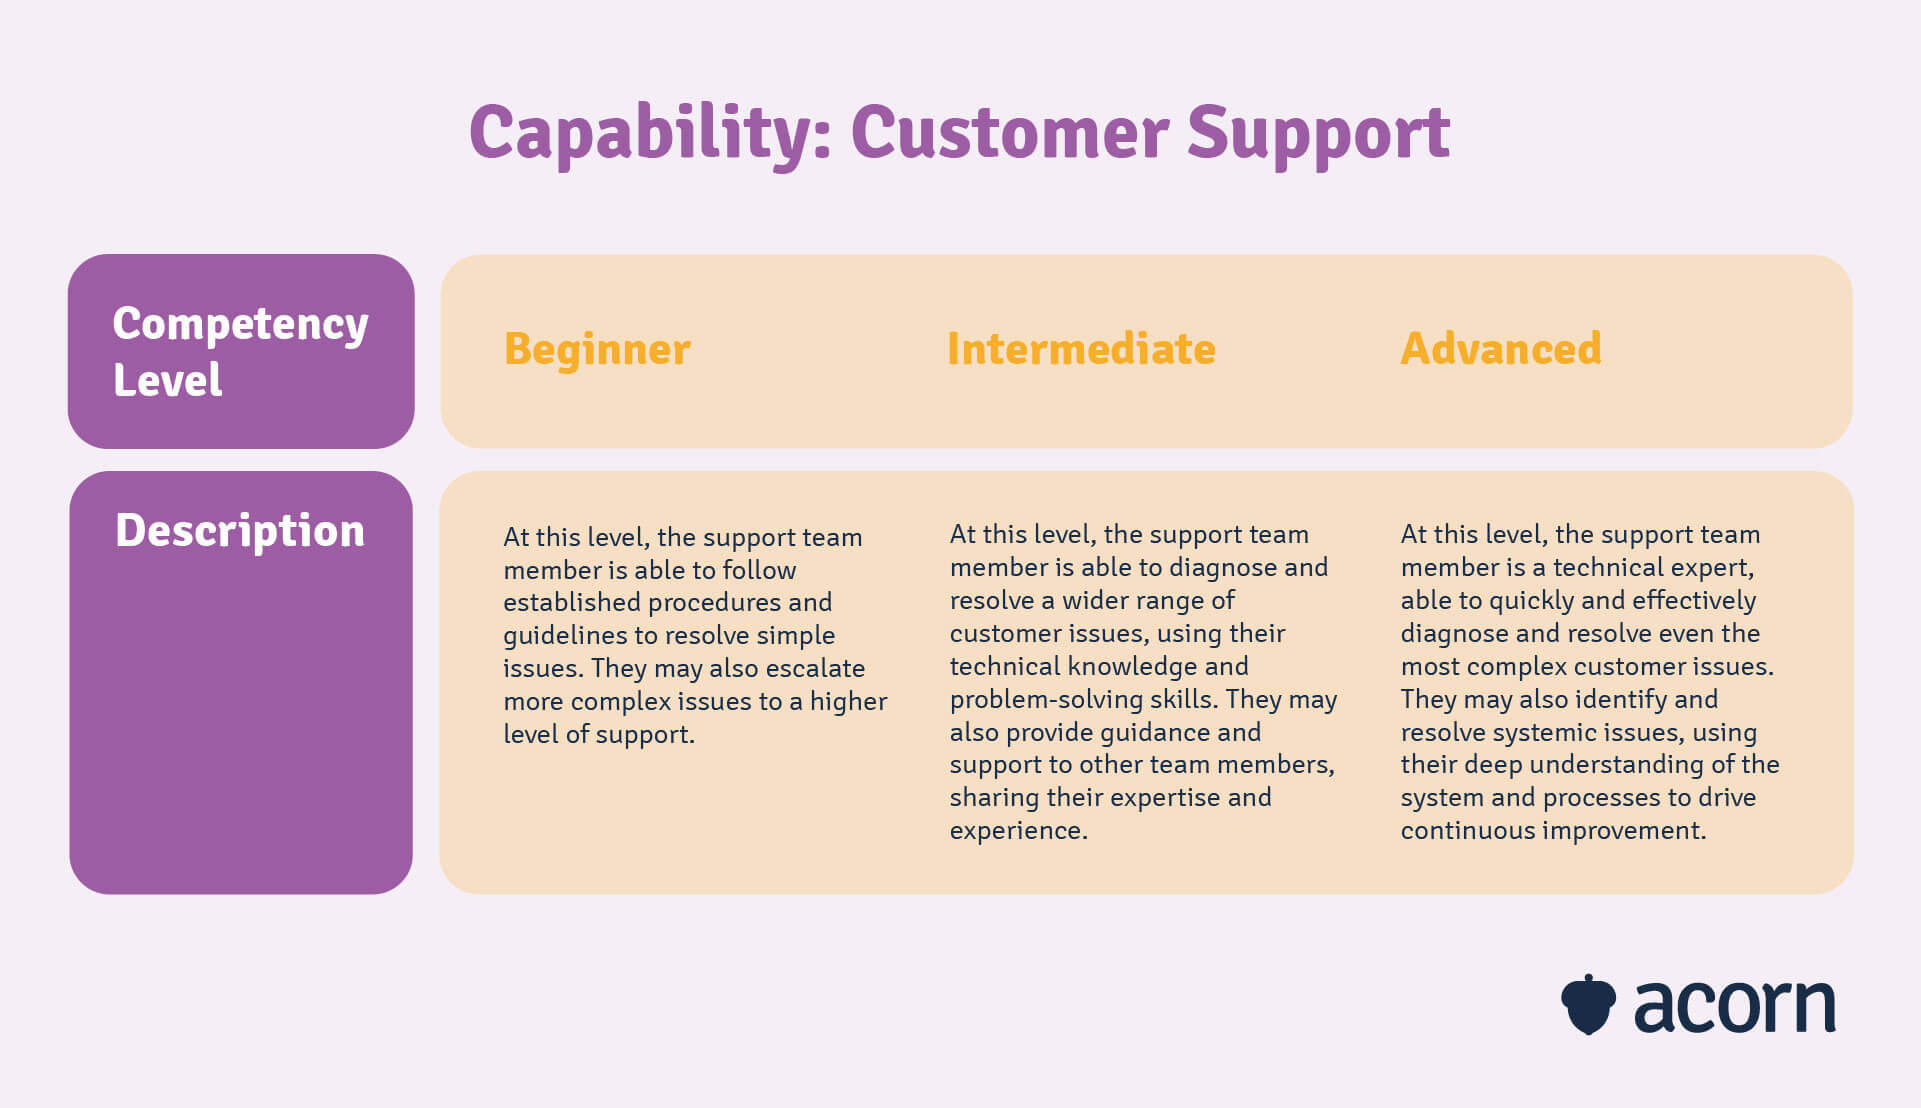 table showing the three competency levels for the capability of customer support